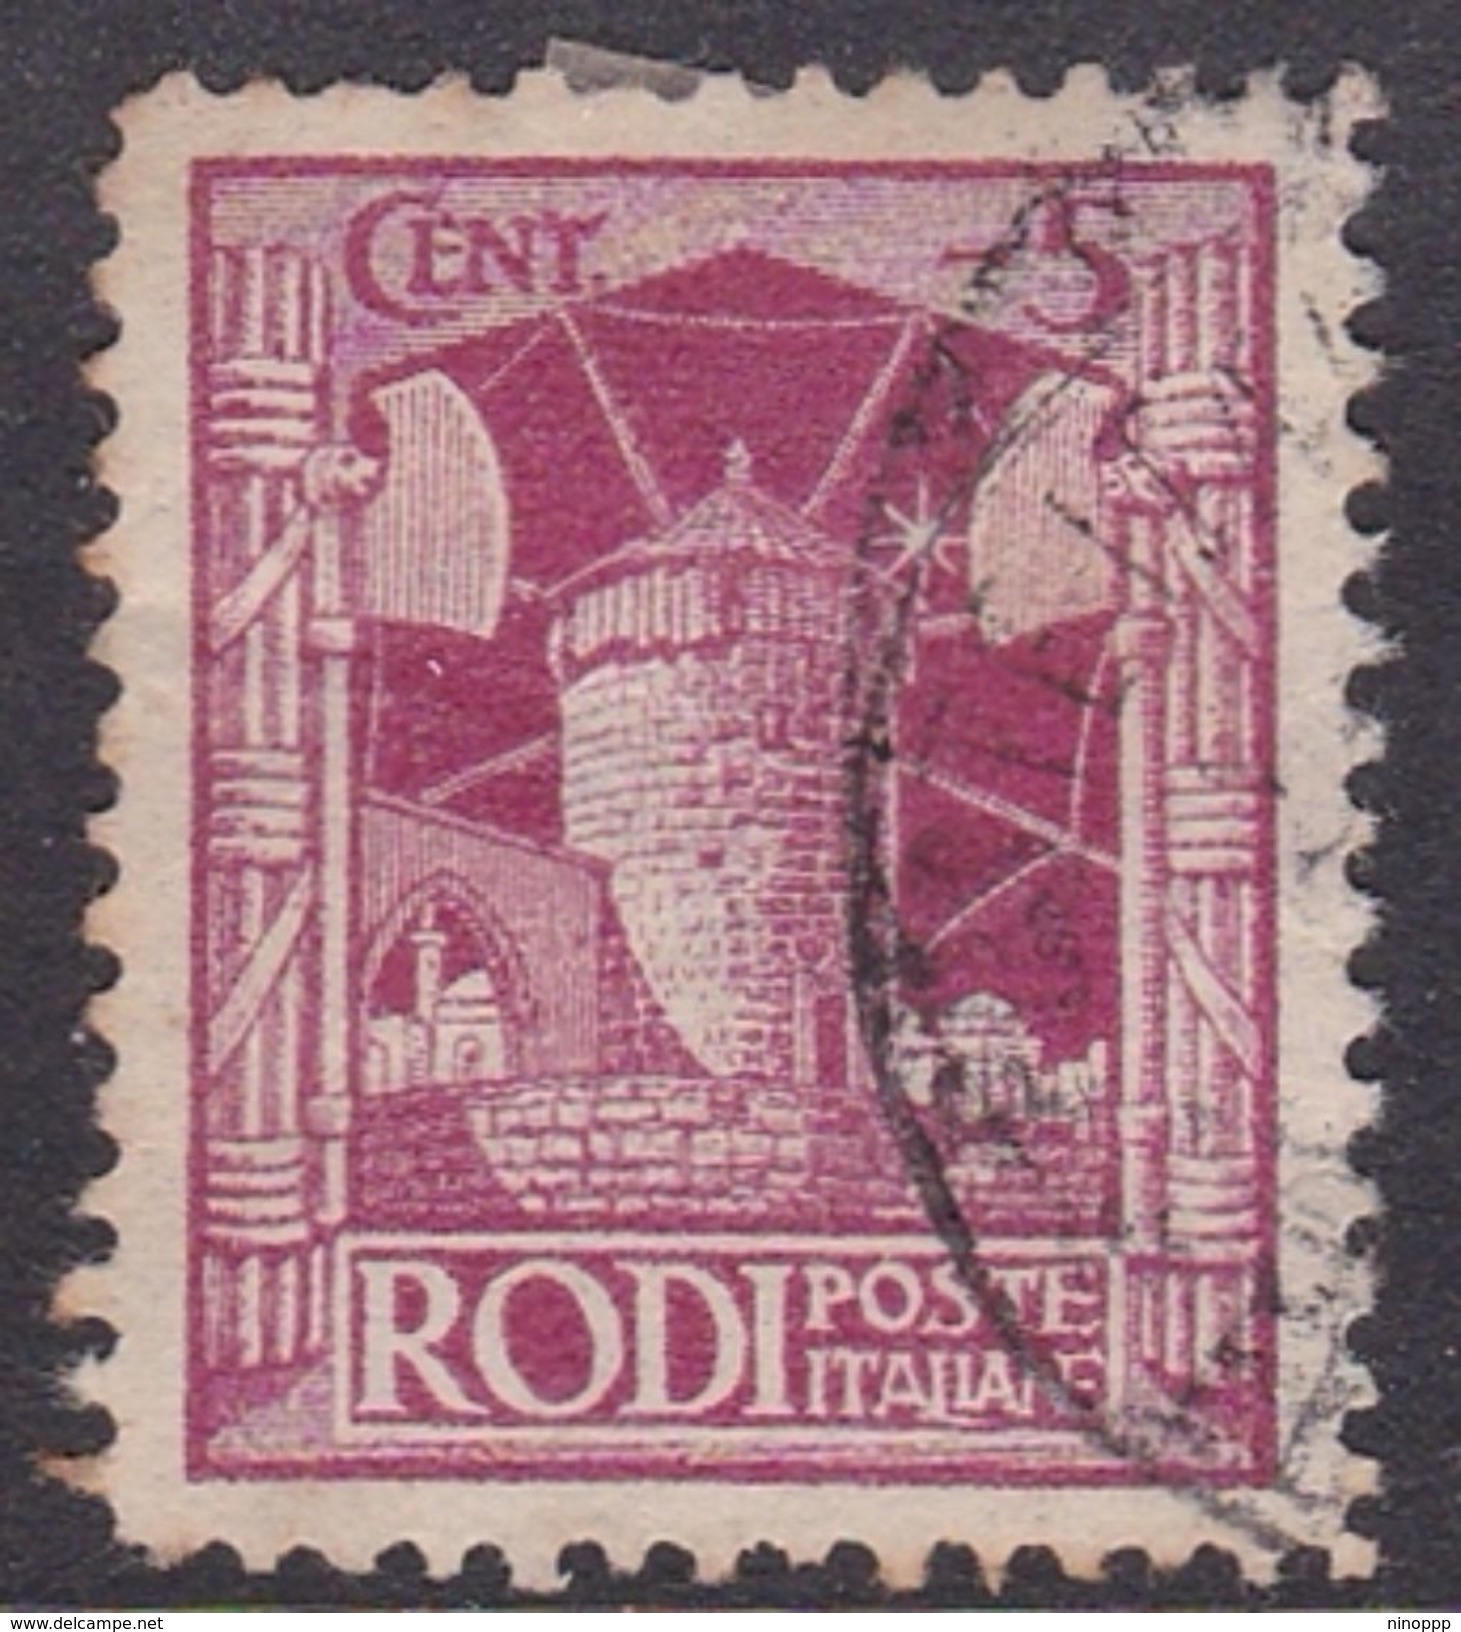 Italy-Colonies And Territories-Aegean General Issue-Rodi S3 1929 Pictorials Perf 11  5c Magenta Used - General Issues